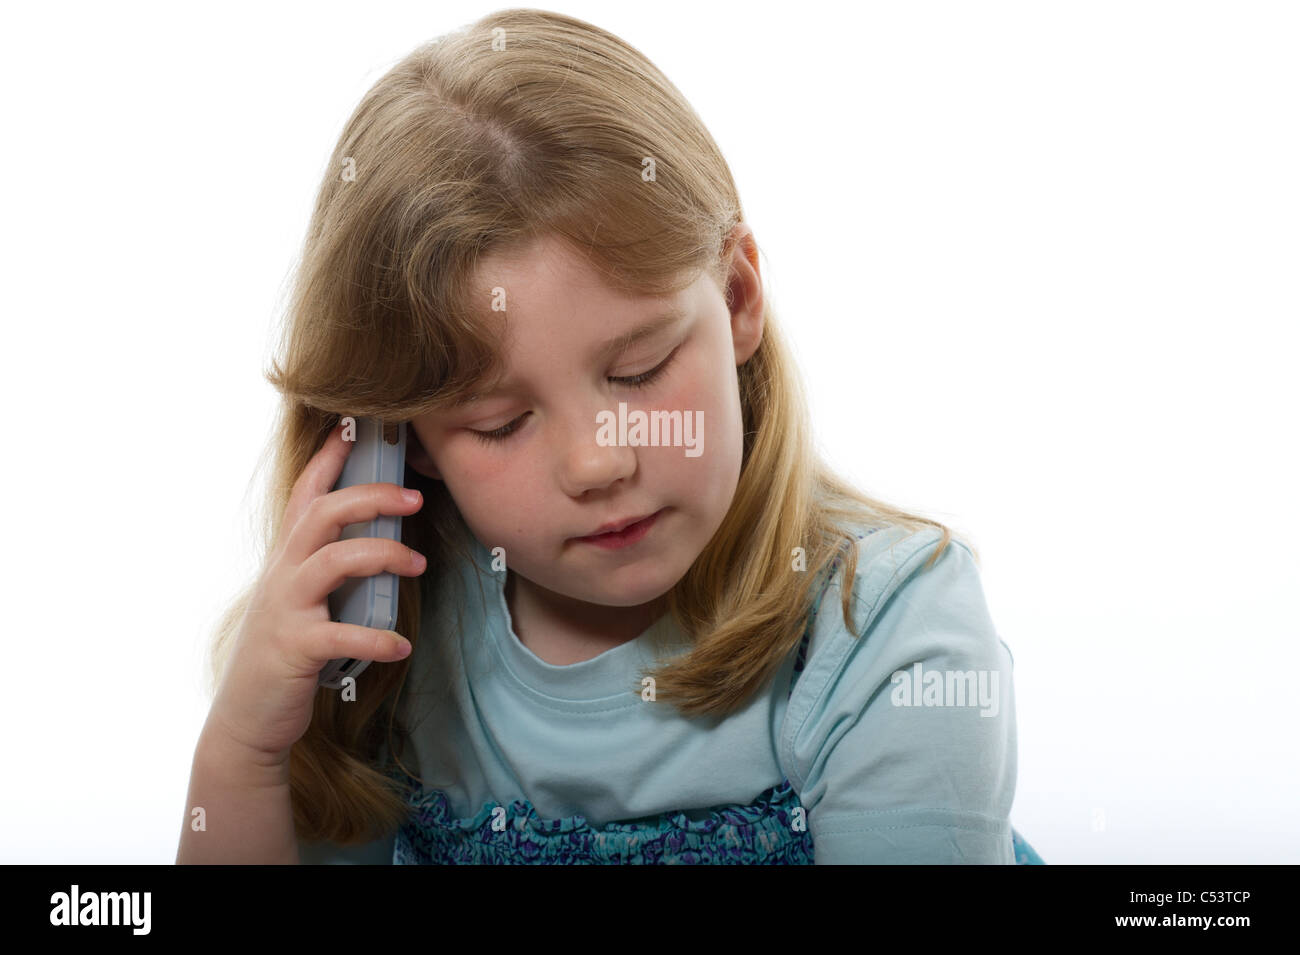 Image of young girl using a mobile phone photographed against a plain white background. Stock Photo